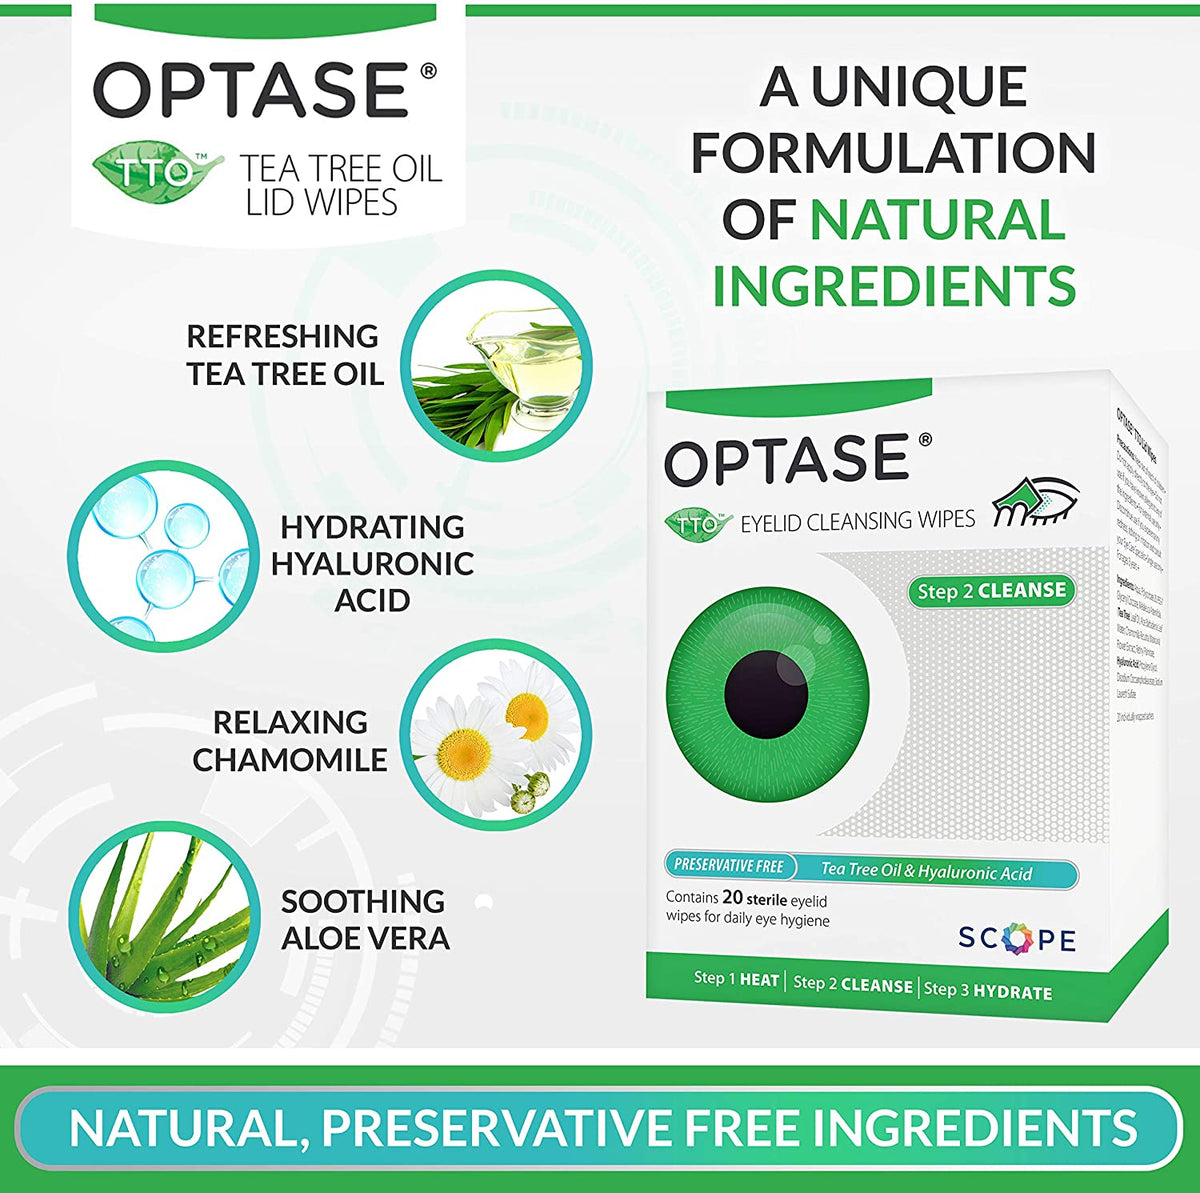 Optase® Tto Lid Wipes The Eye Doctor Shop